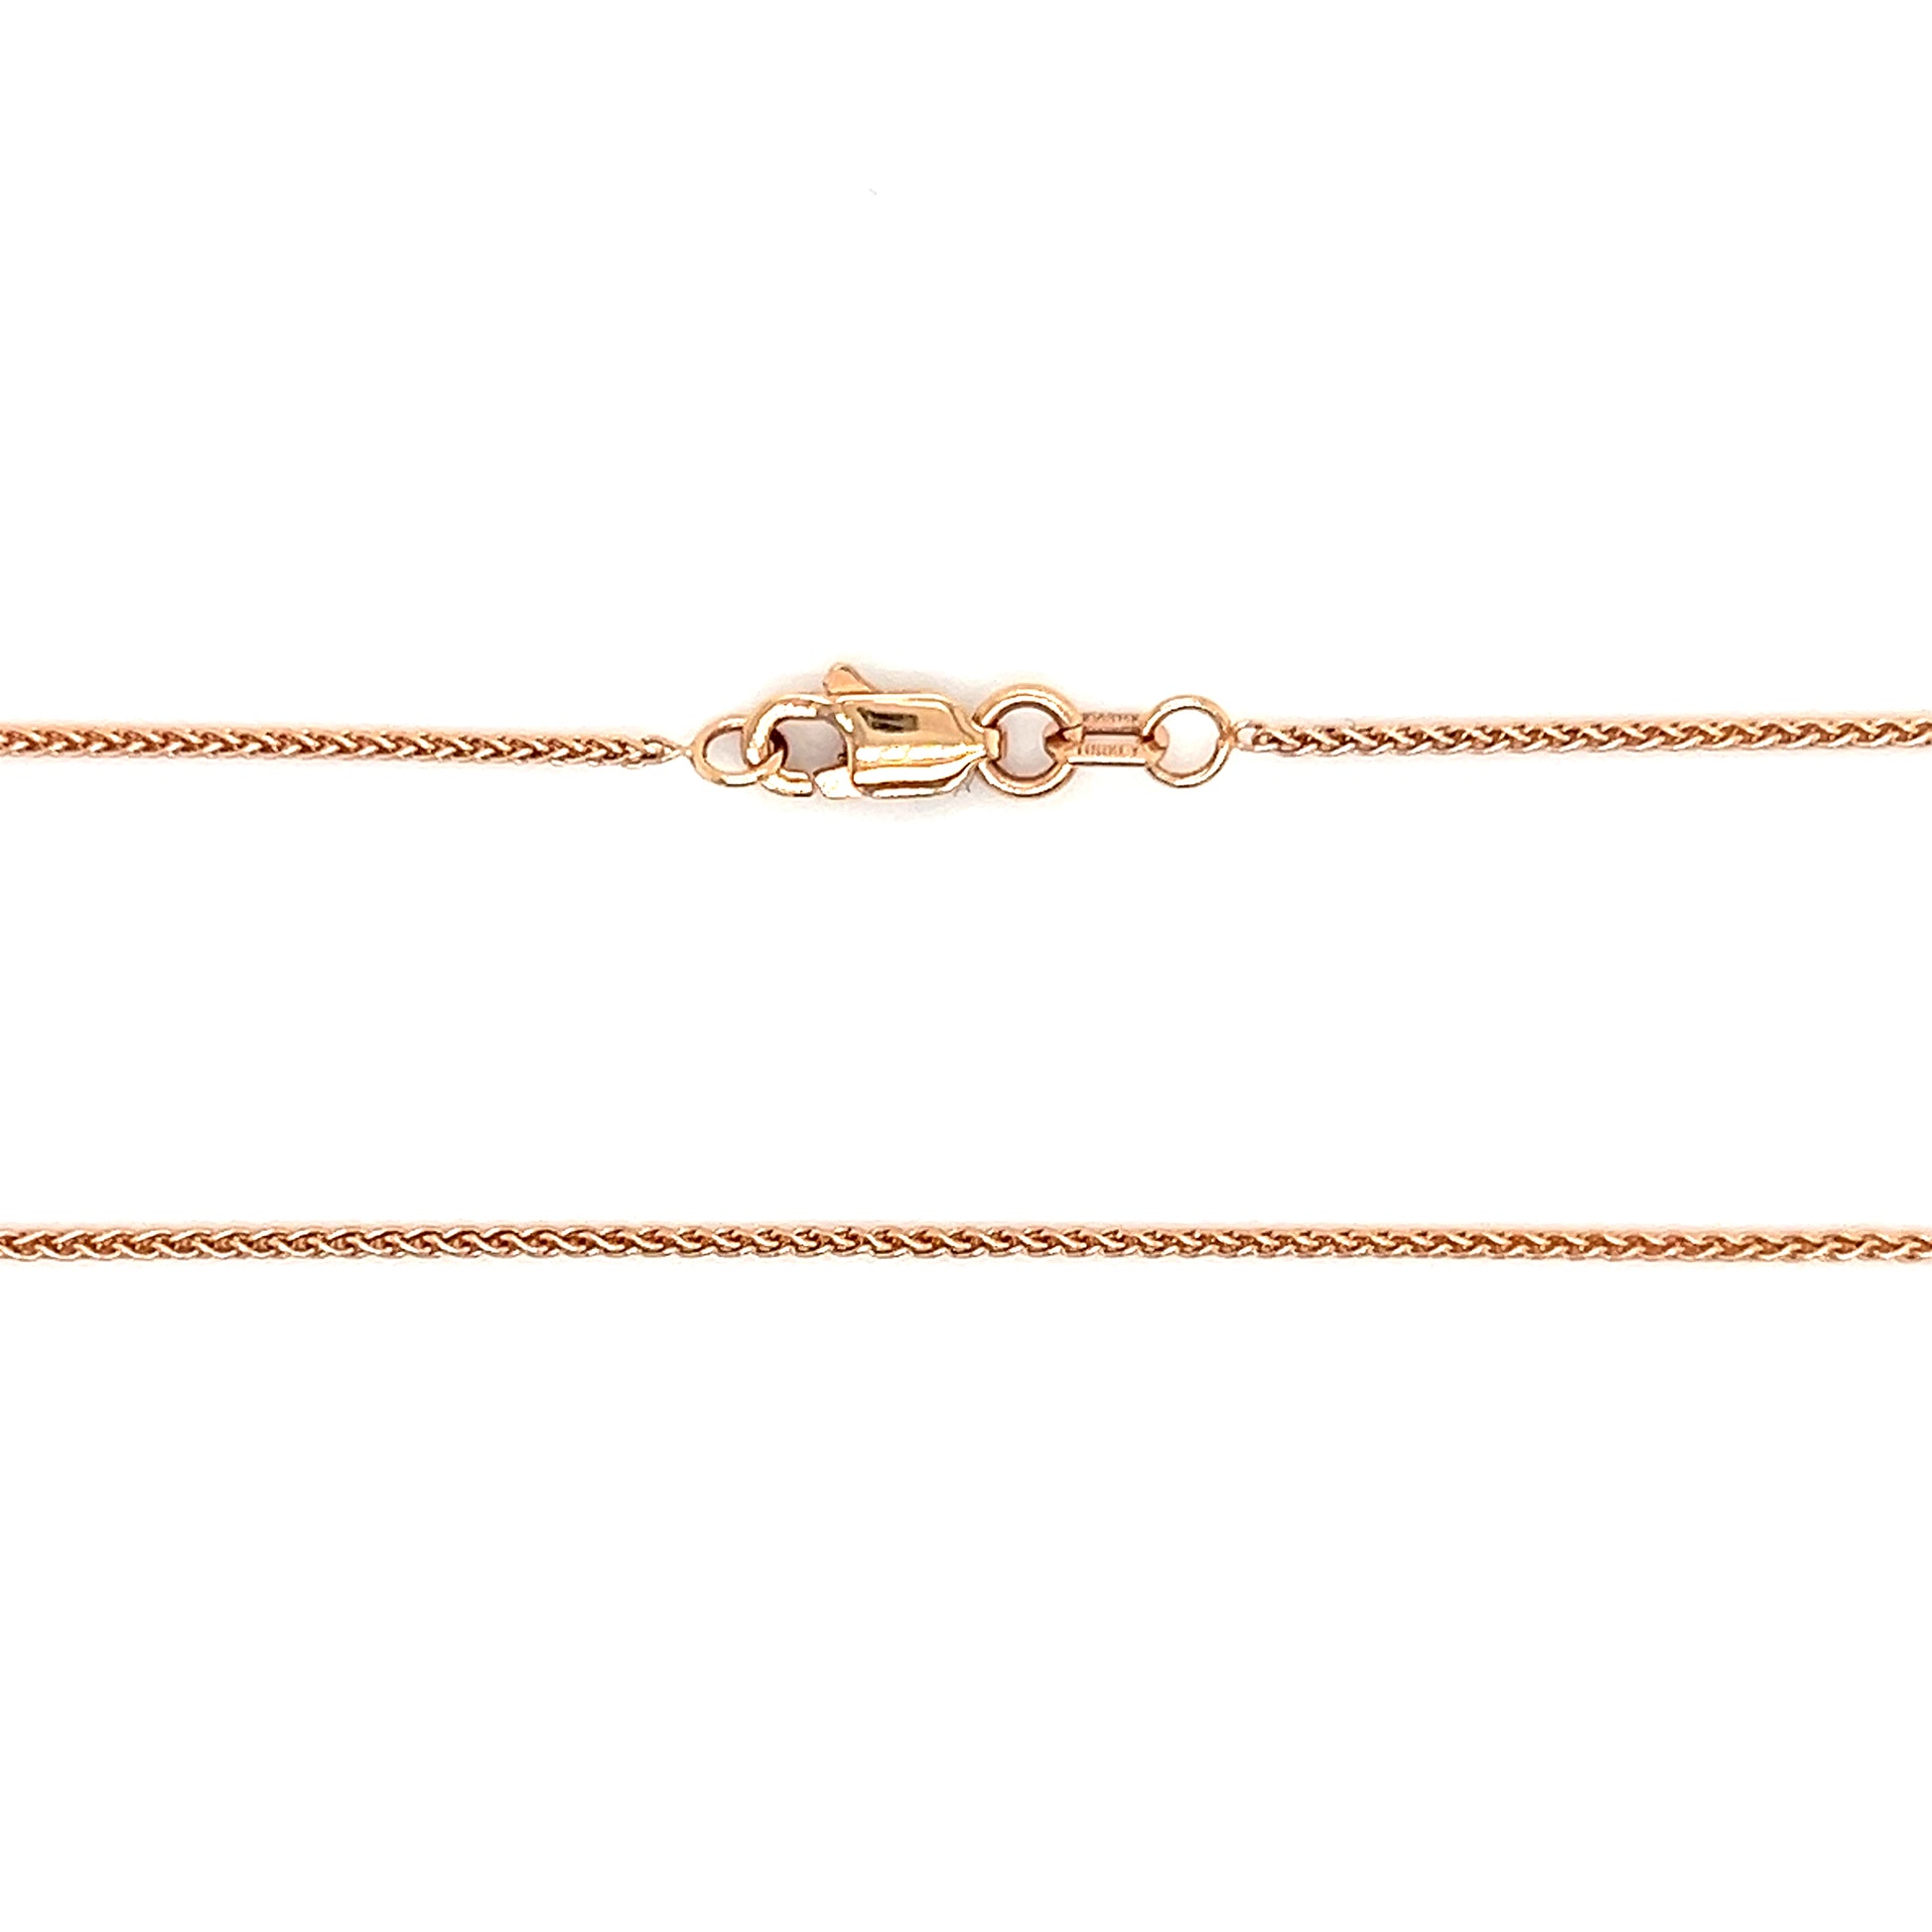 Wheat Chain 1.05mm with 18 Inches of Length in 14K Rose Gold Chain and Clasp View